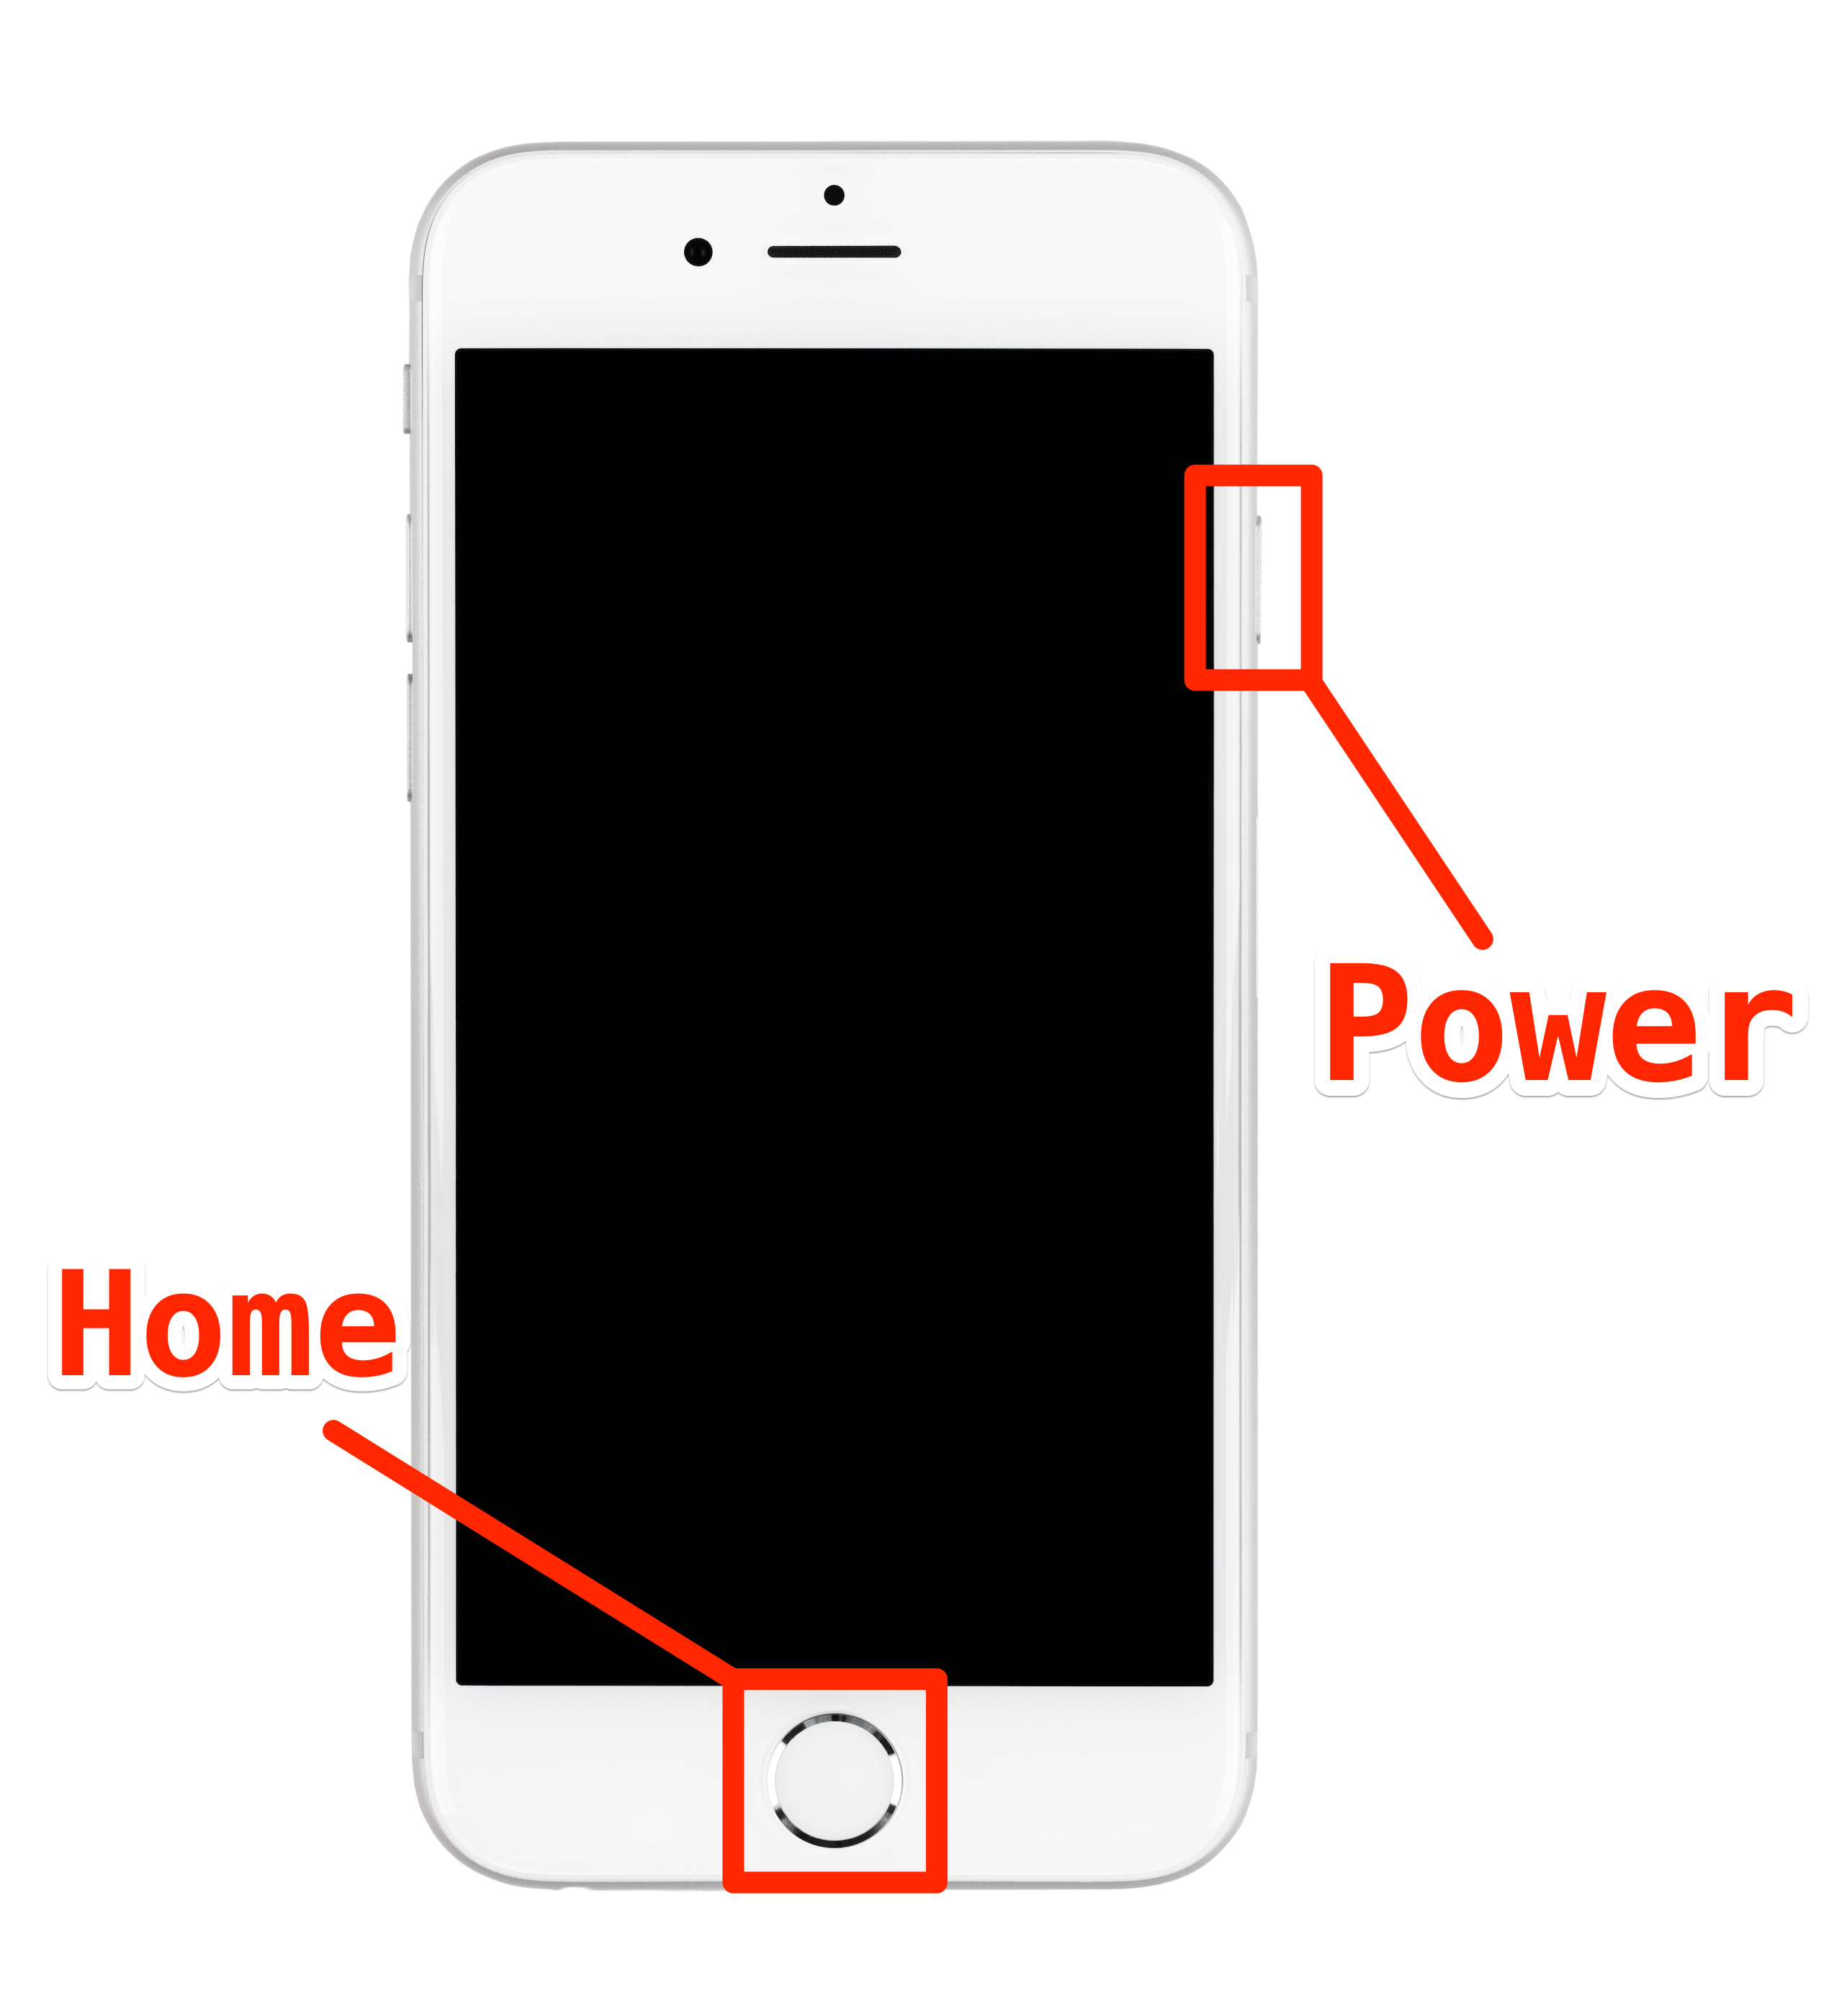 An iPhone 6, with the Home and Power buttons highlighted.